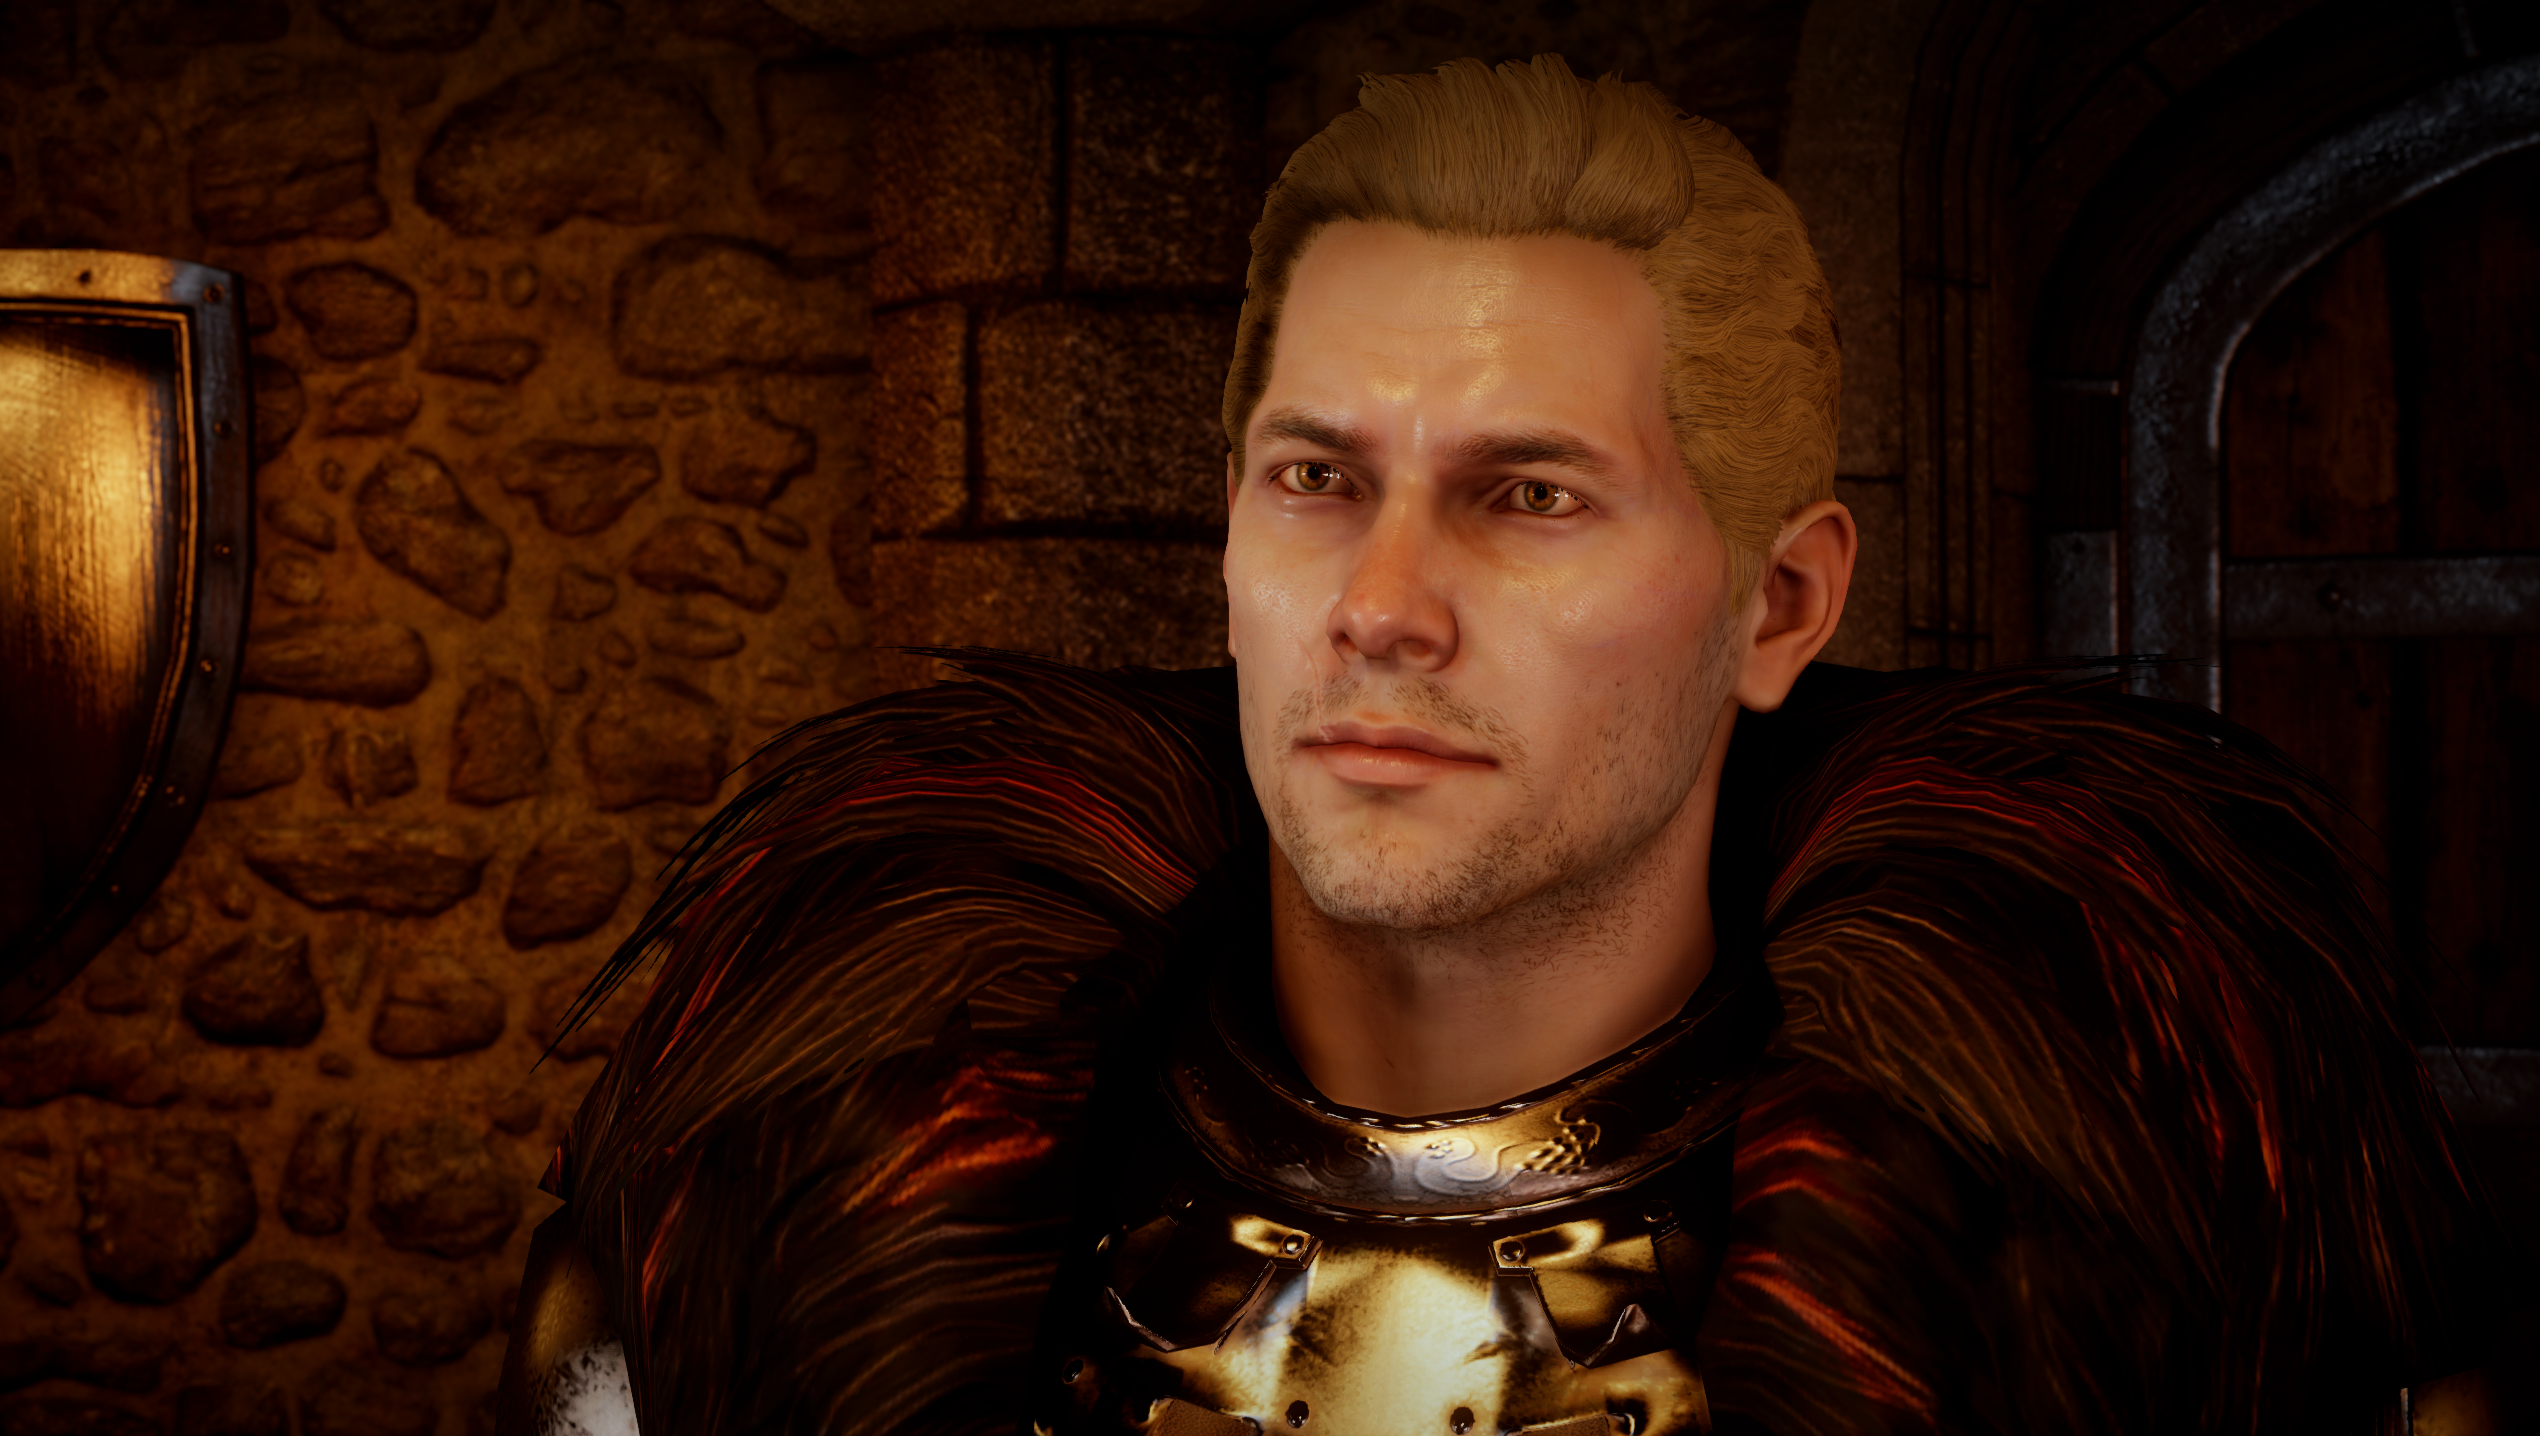 General 2540x1436 Dragon Age warm colors Cullen Rutherford Dragon Age: Inquisition video game men video games PC gaming